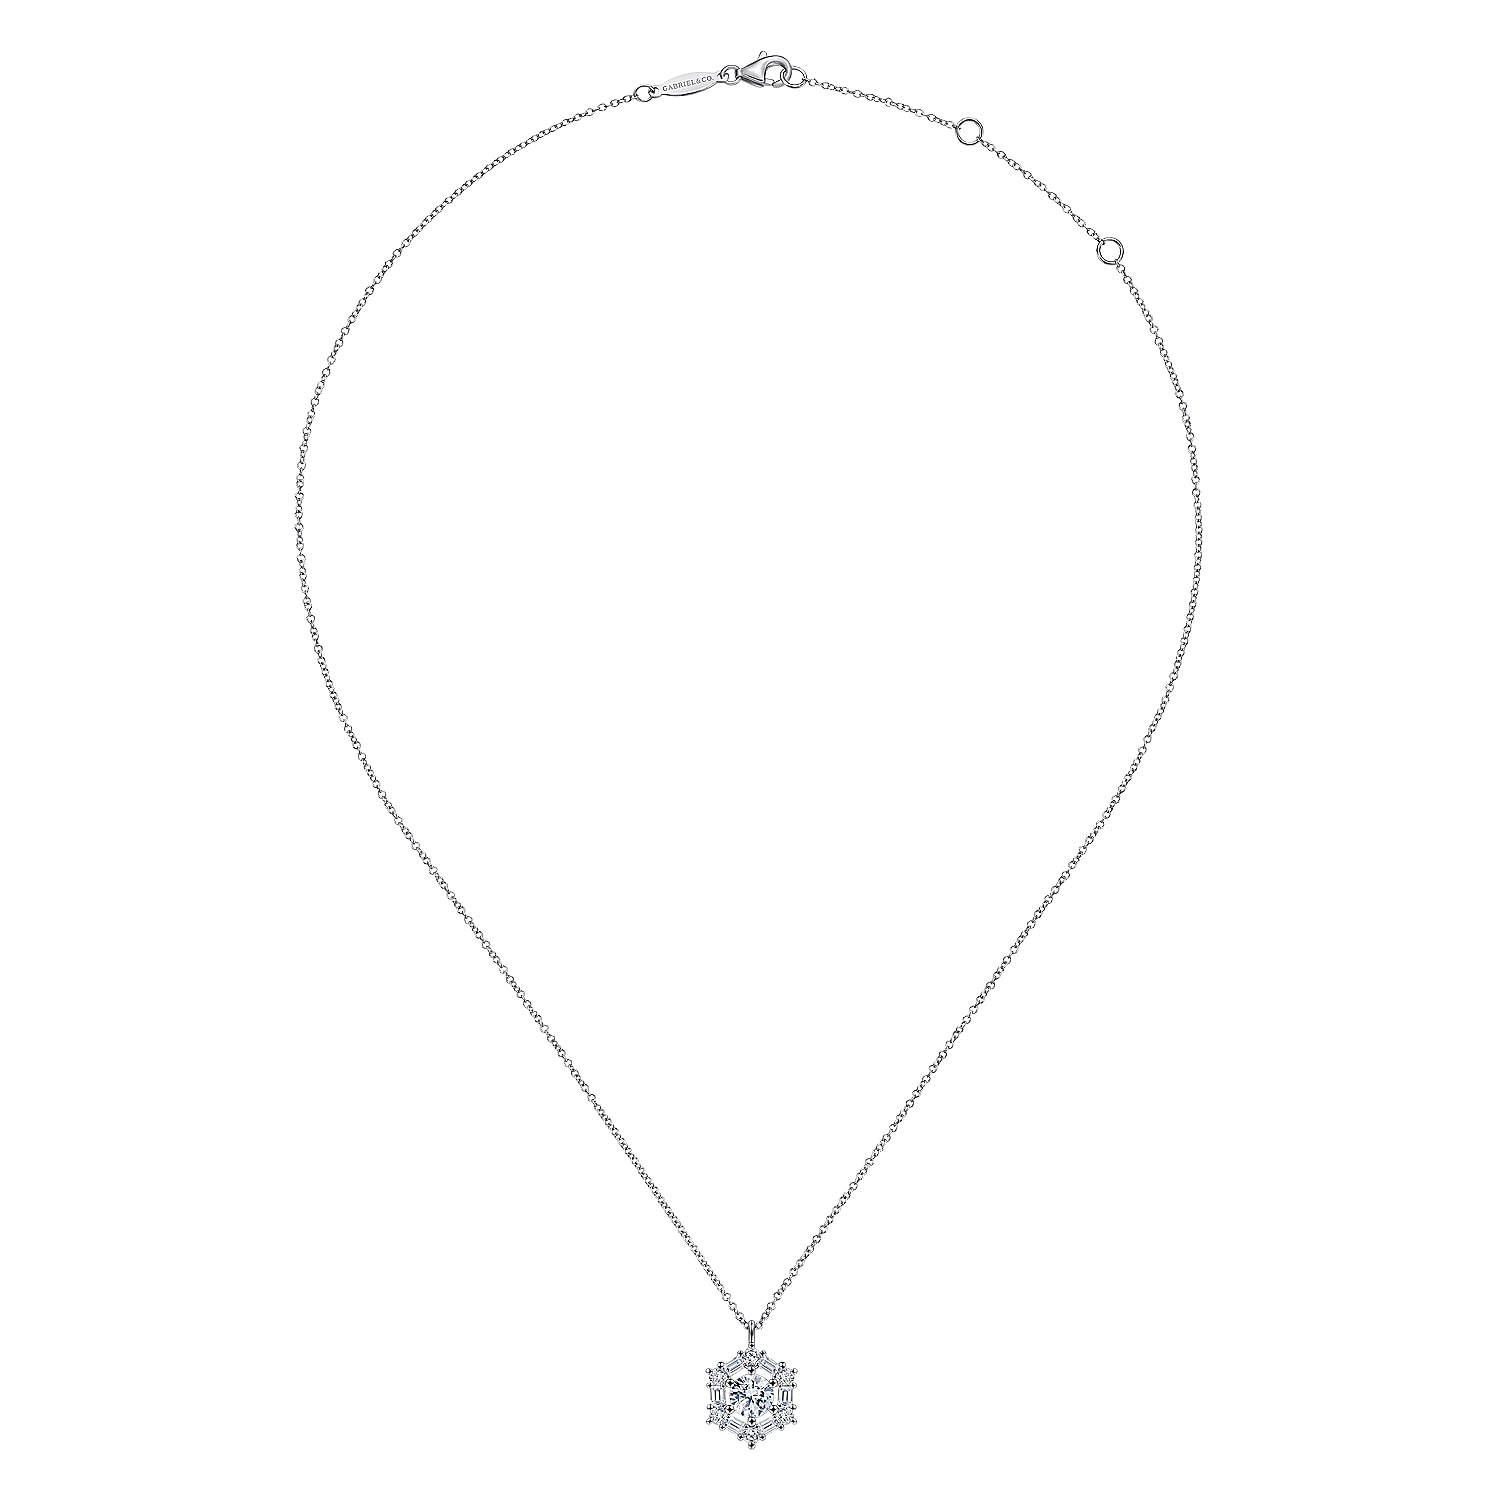 14K White Gold Round Diamond Pendant Necklace with Baguette and Round Hexagonal Halo